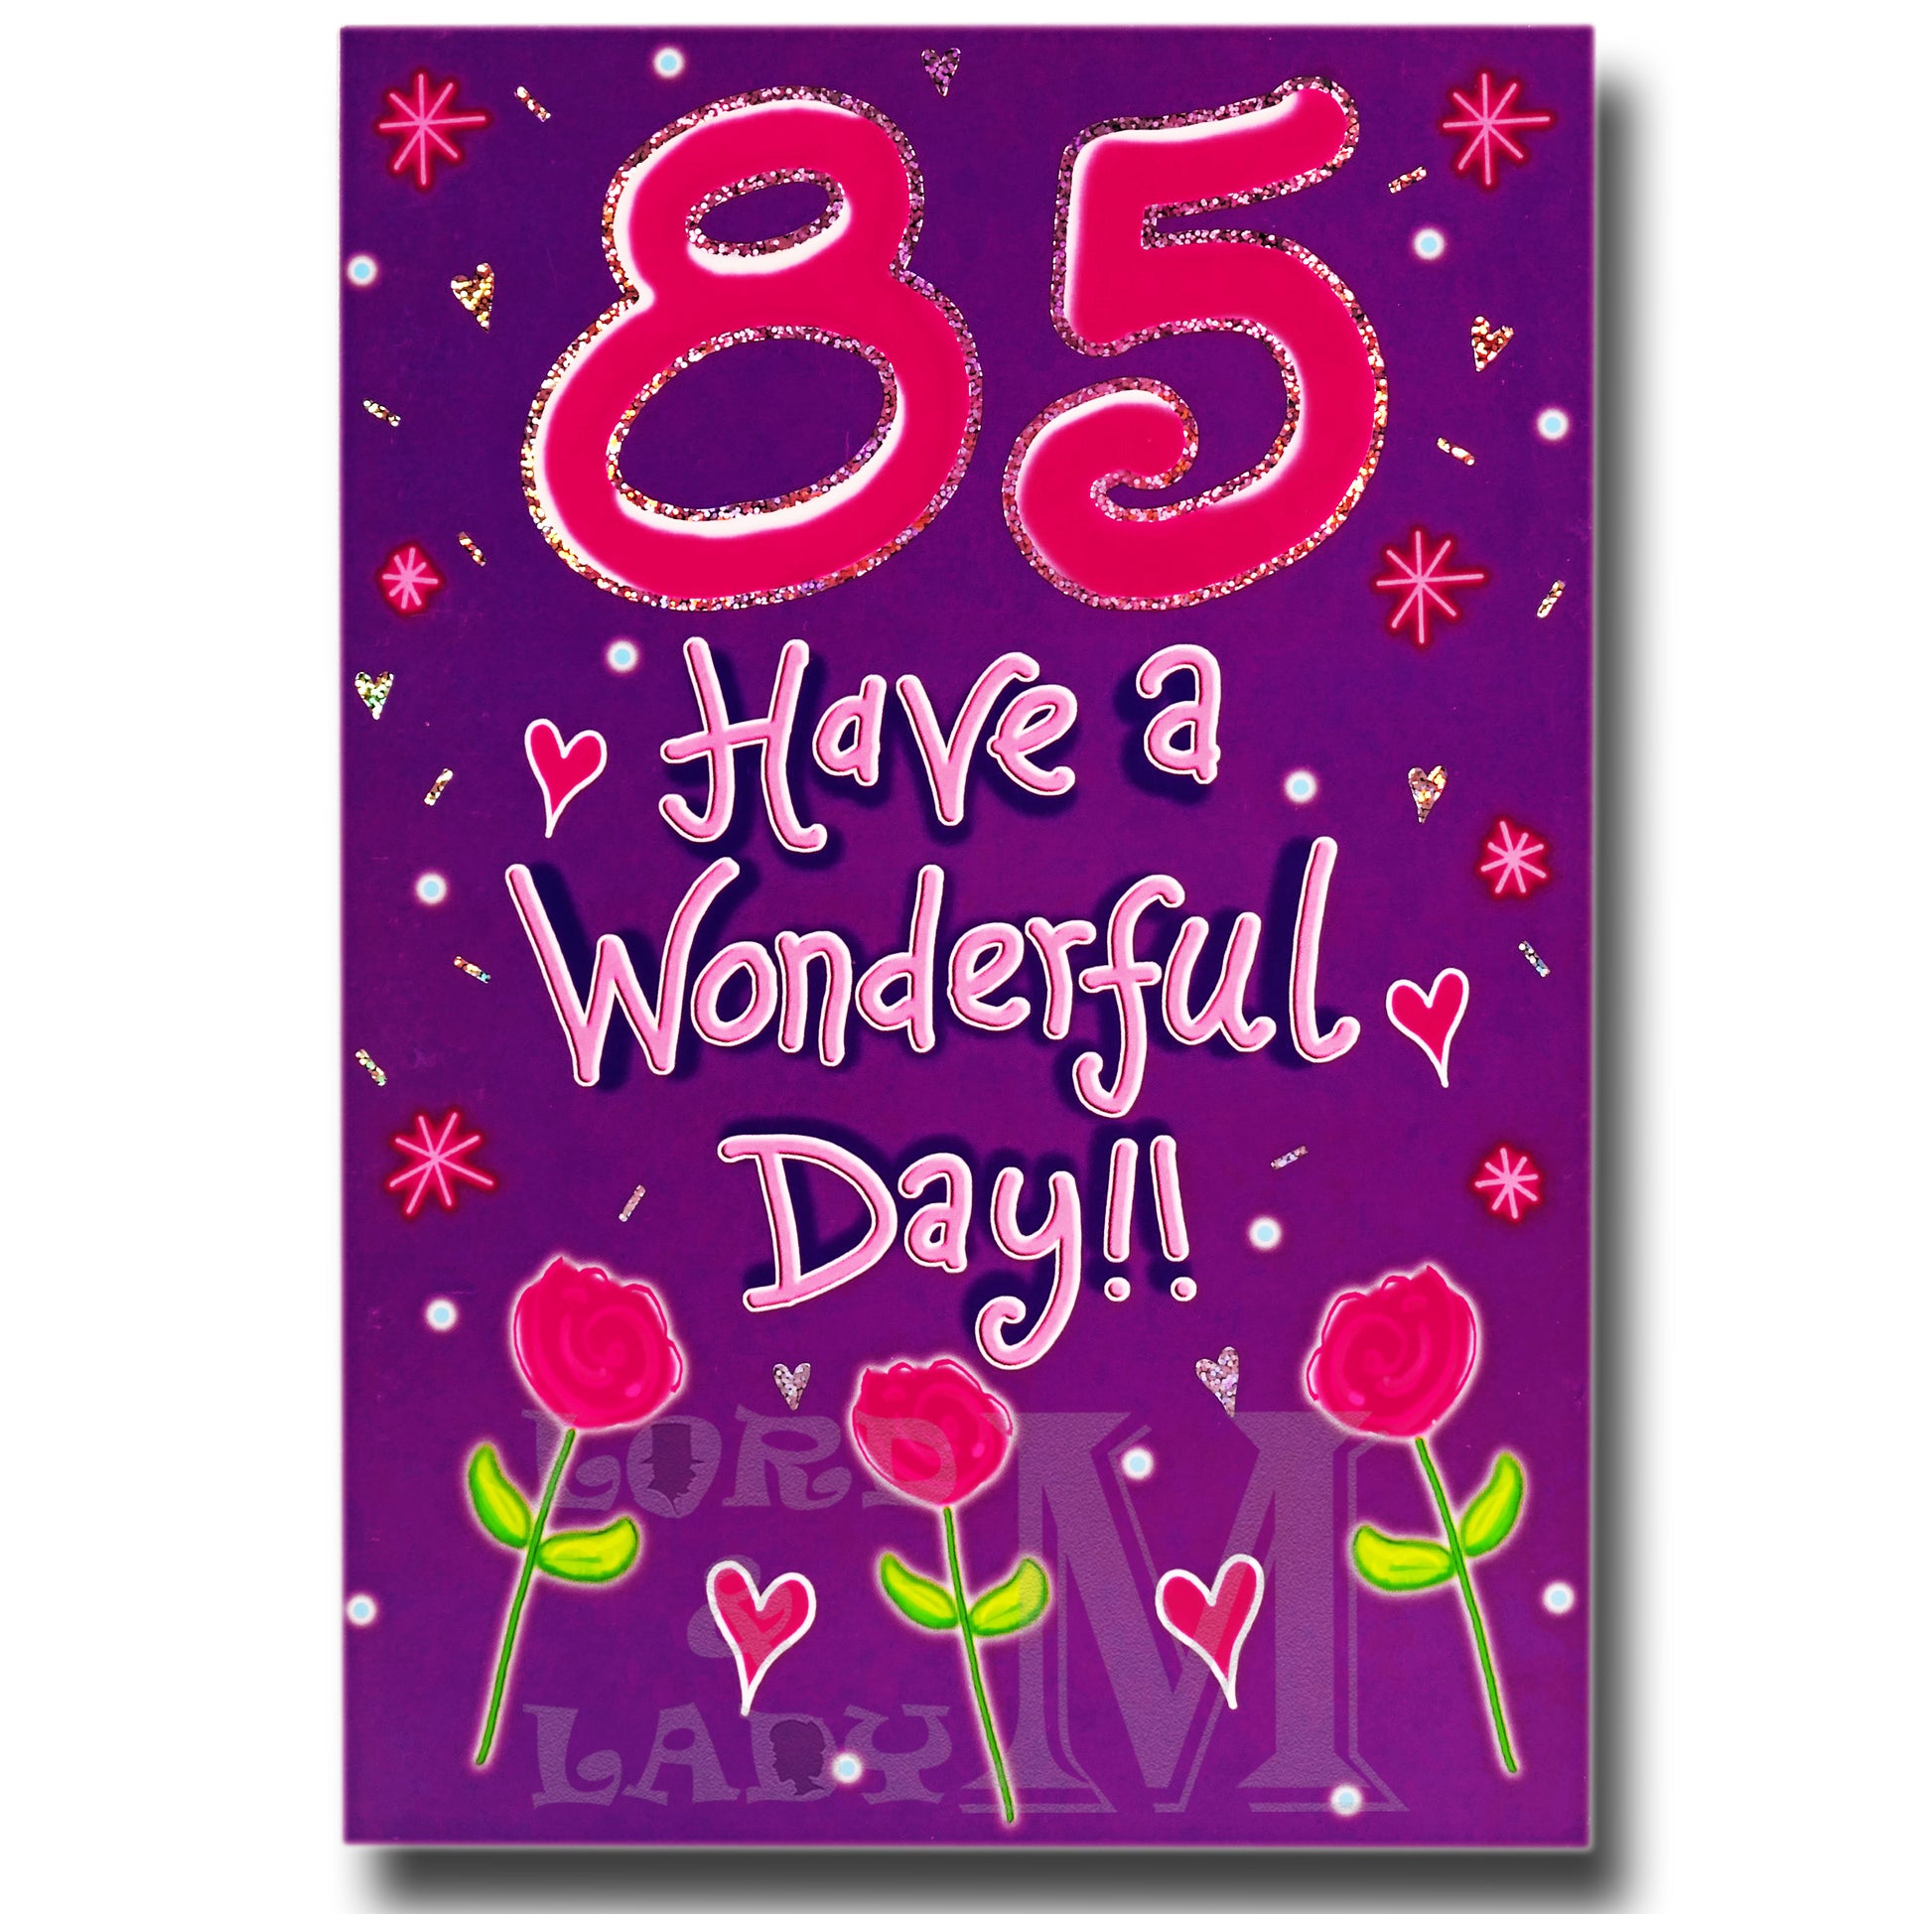 18cm - 85 Have A Wonderful Day - CWH